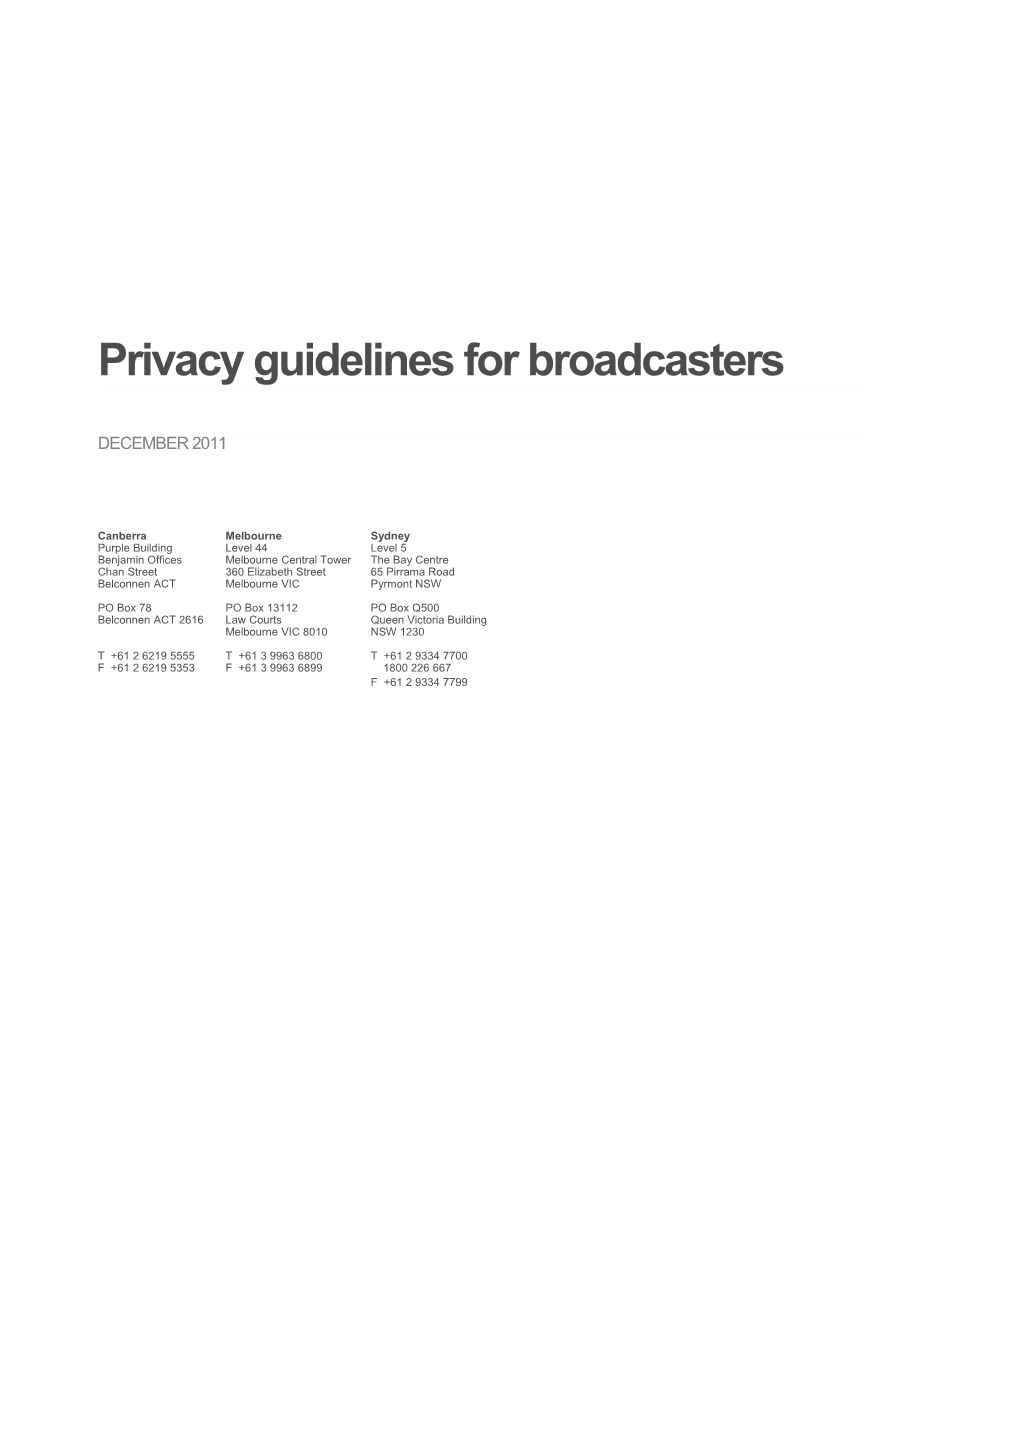 Privacy Guidelines for Broadcasters